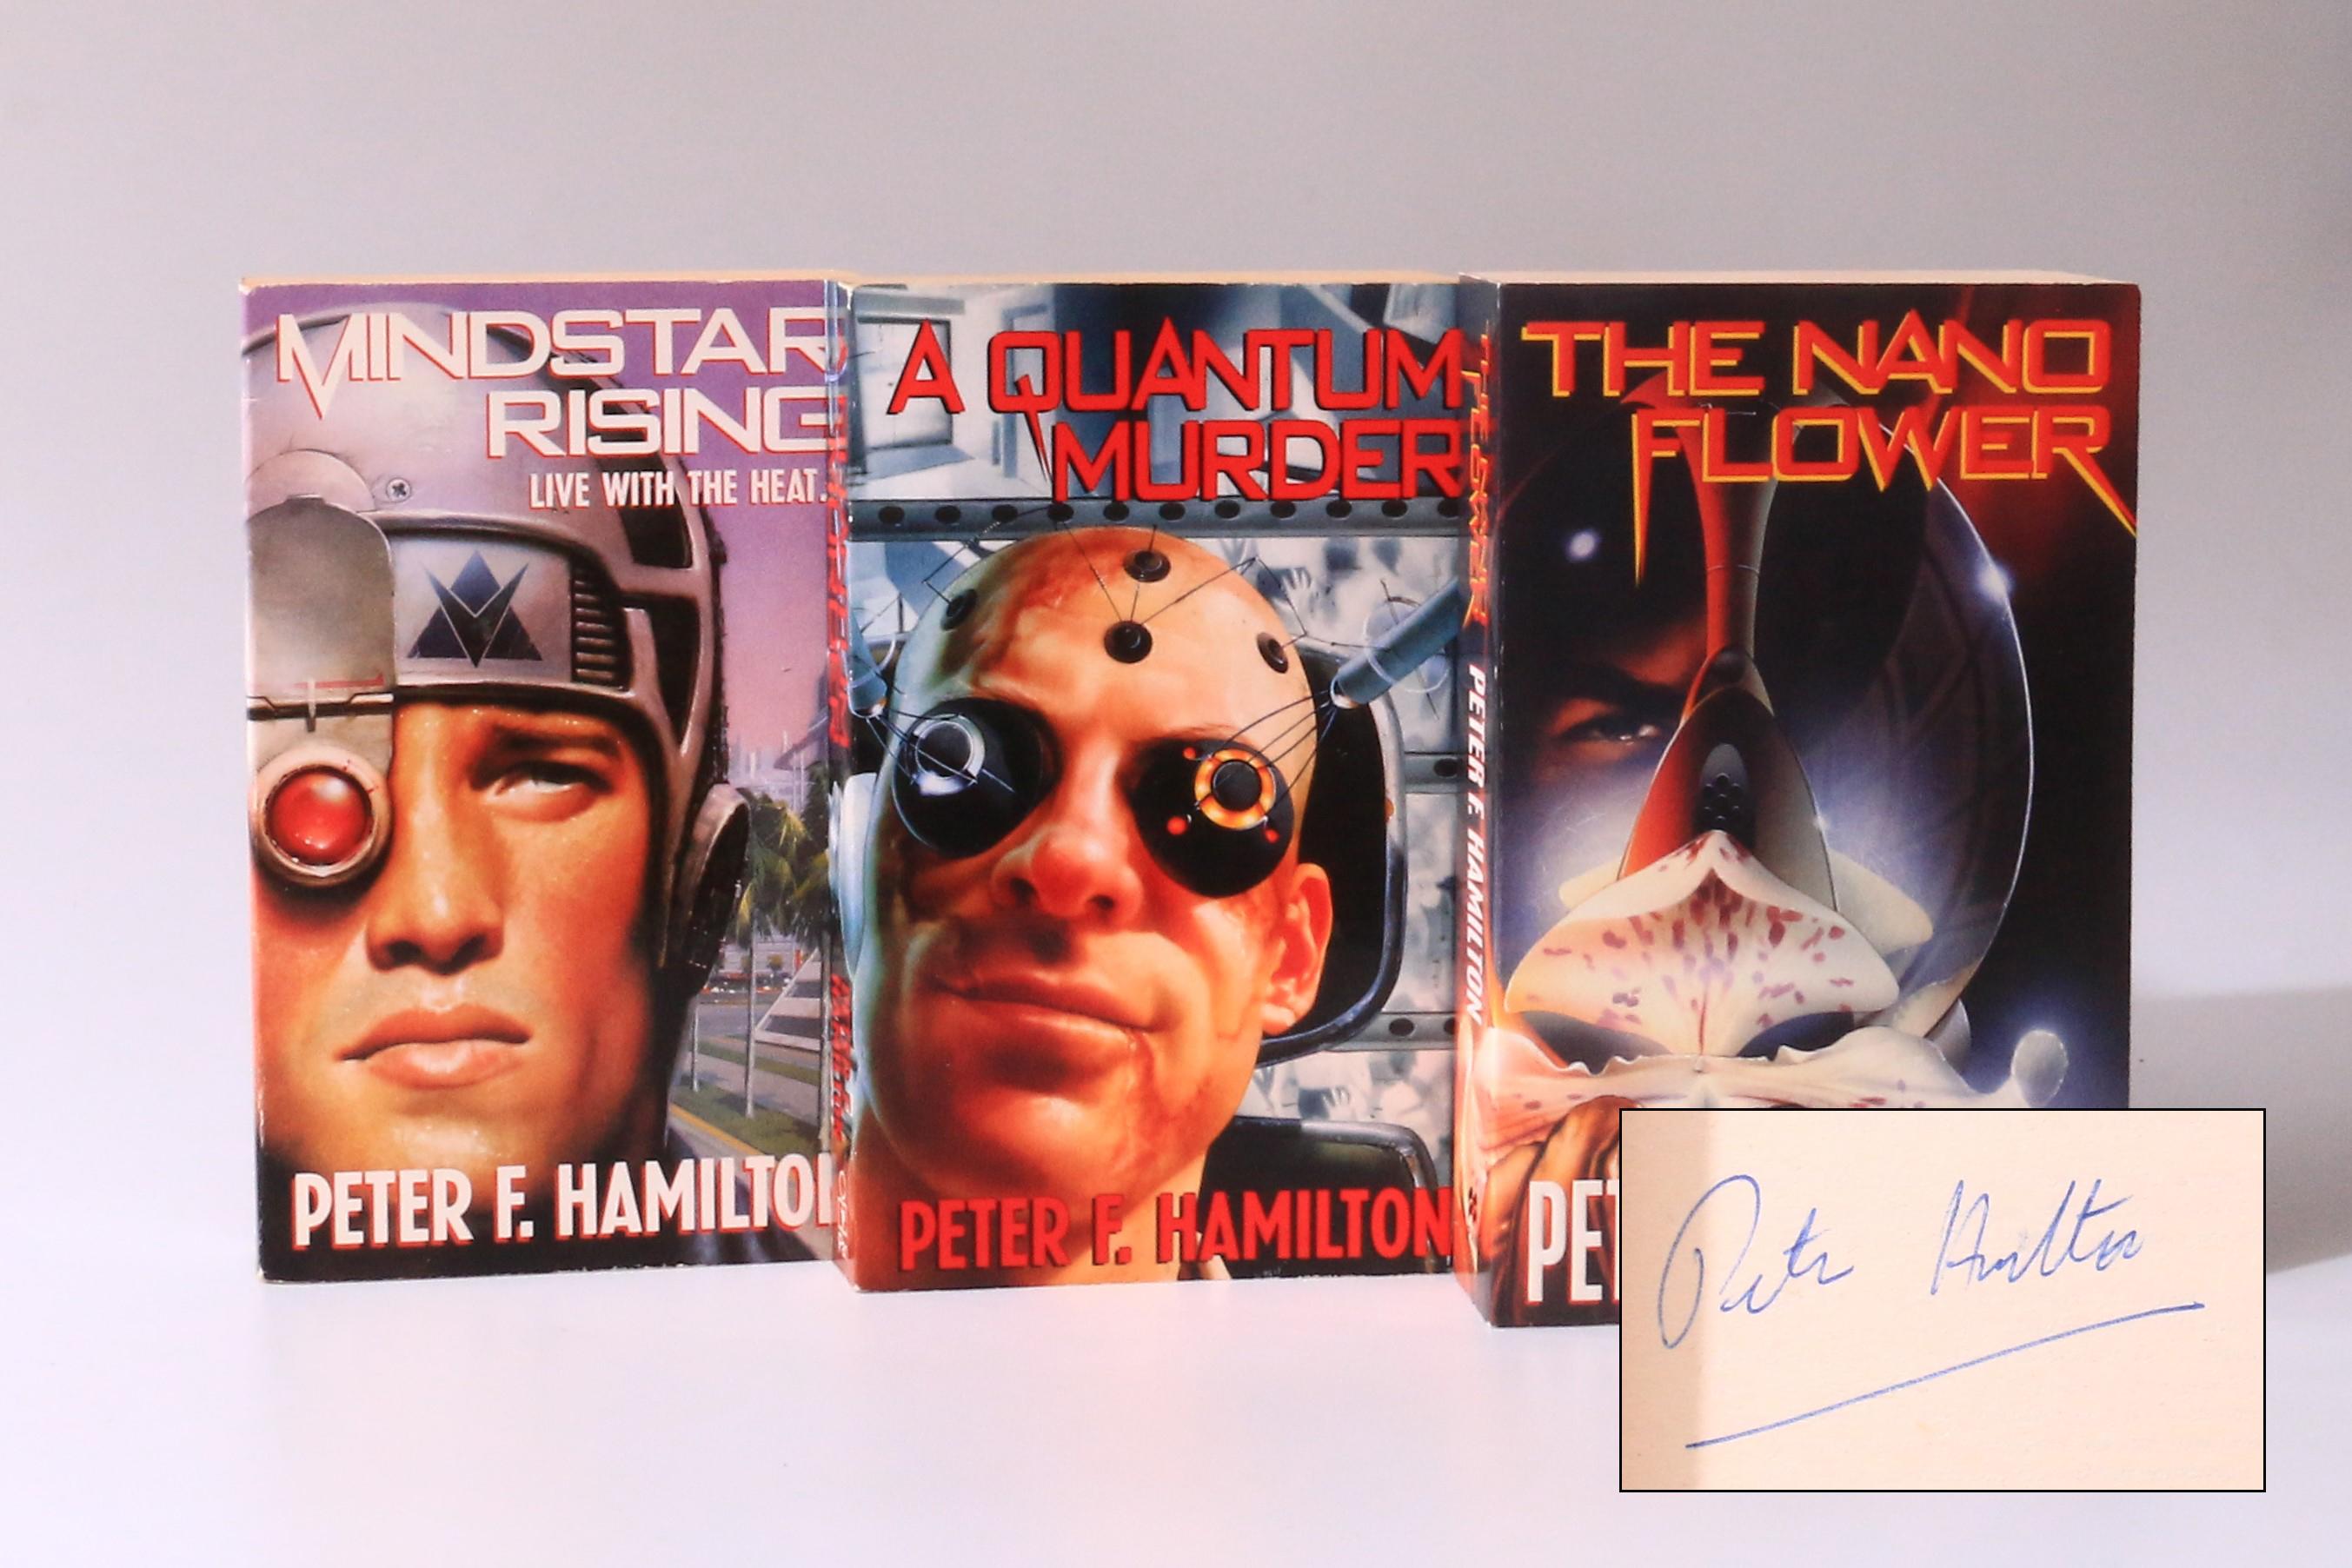 Peter F. Hamilton - The Greg Mandel Trilogy [comprising] Mindstar Rising, A Quantum Murder, and The Nano Flower - Pan, 1993-1995, Signed First Edition.